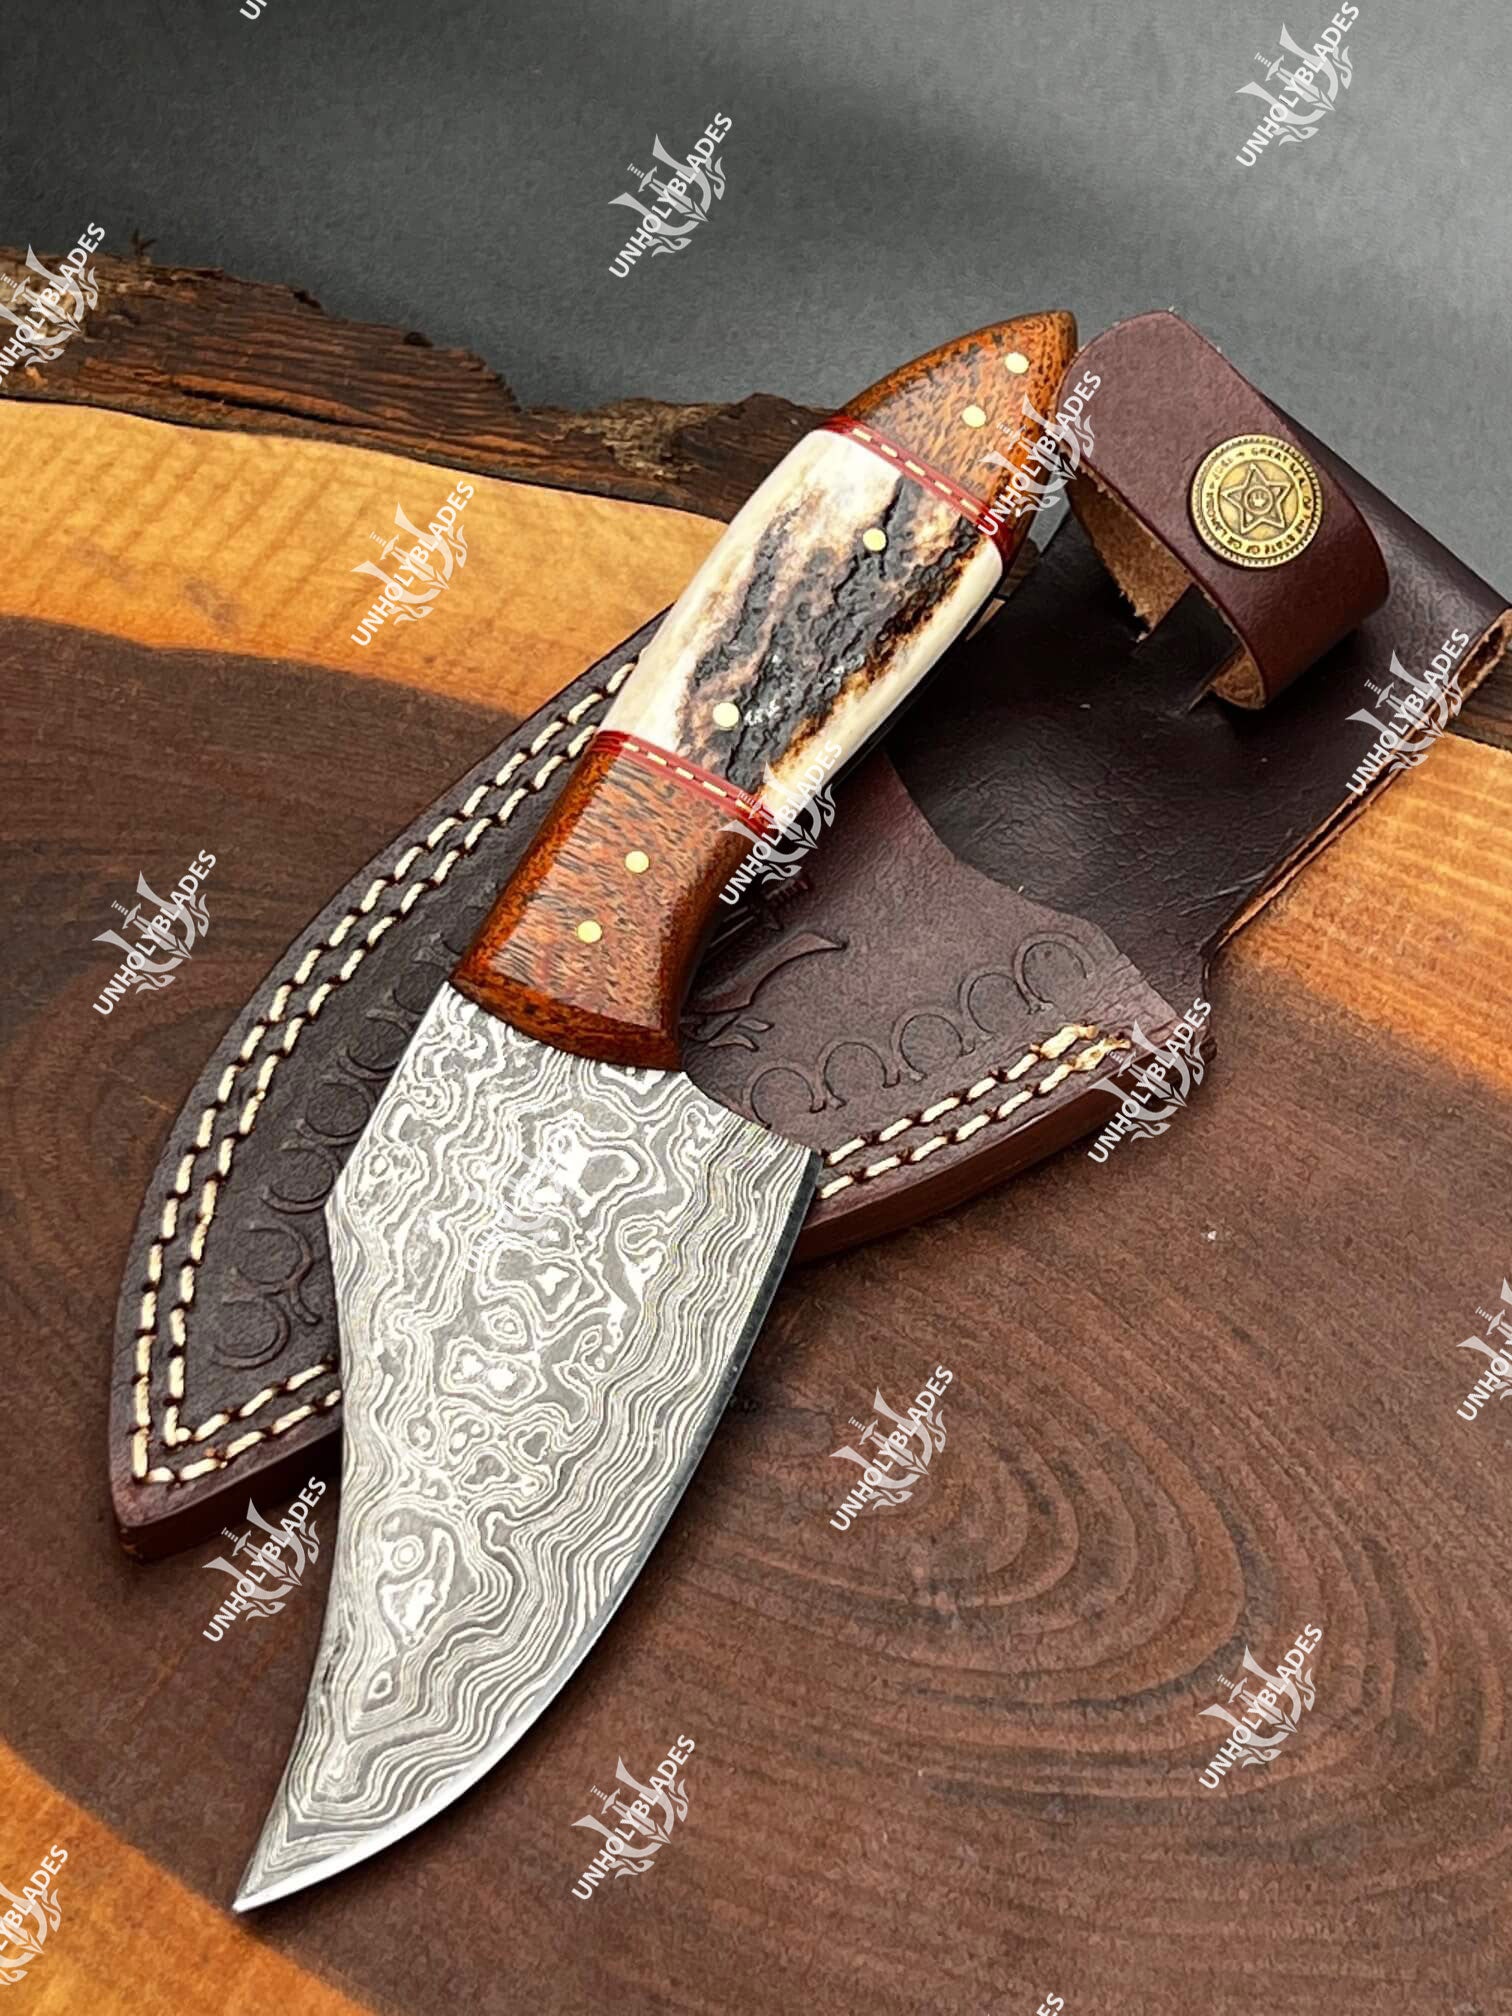 Bmk-225 Turquoise Spacers Damascus Steel Hunting knife